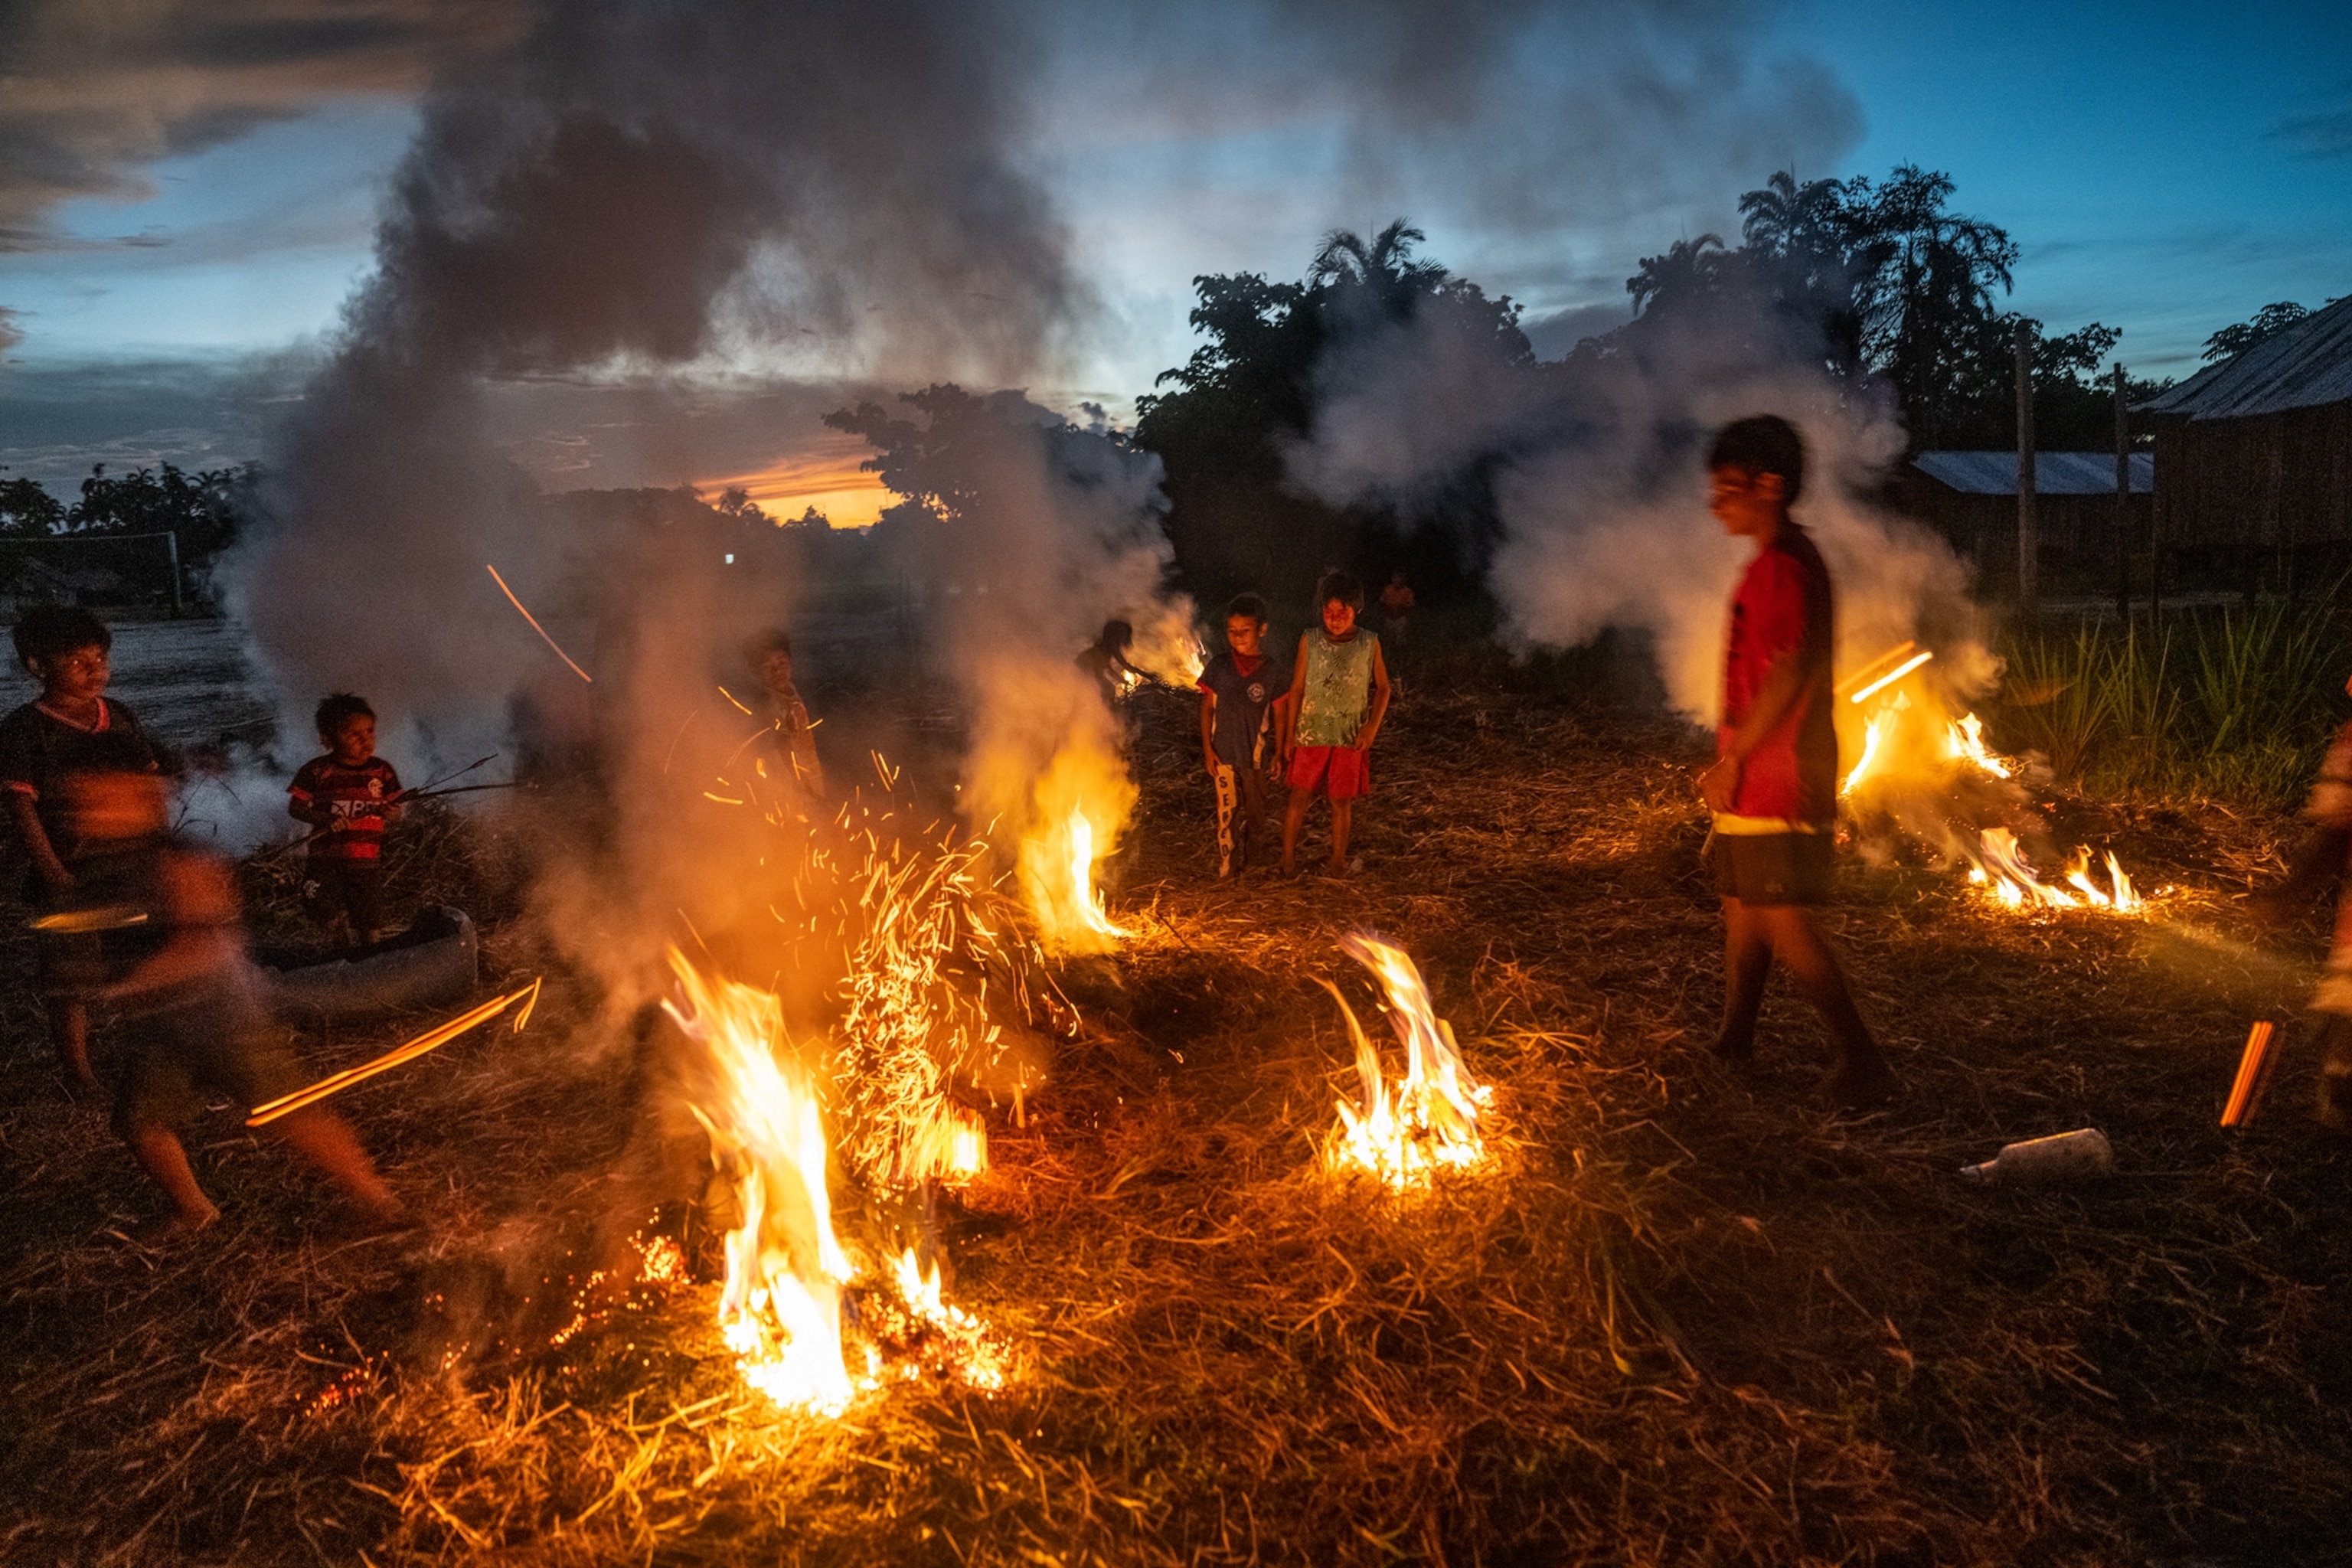 Burning dry grass and children adding more fuel to the fires at sunset.